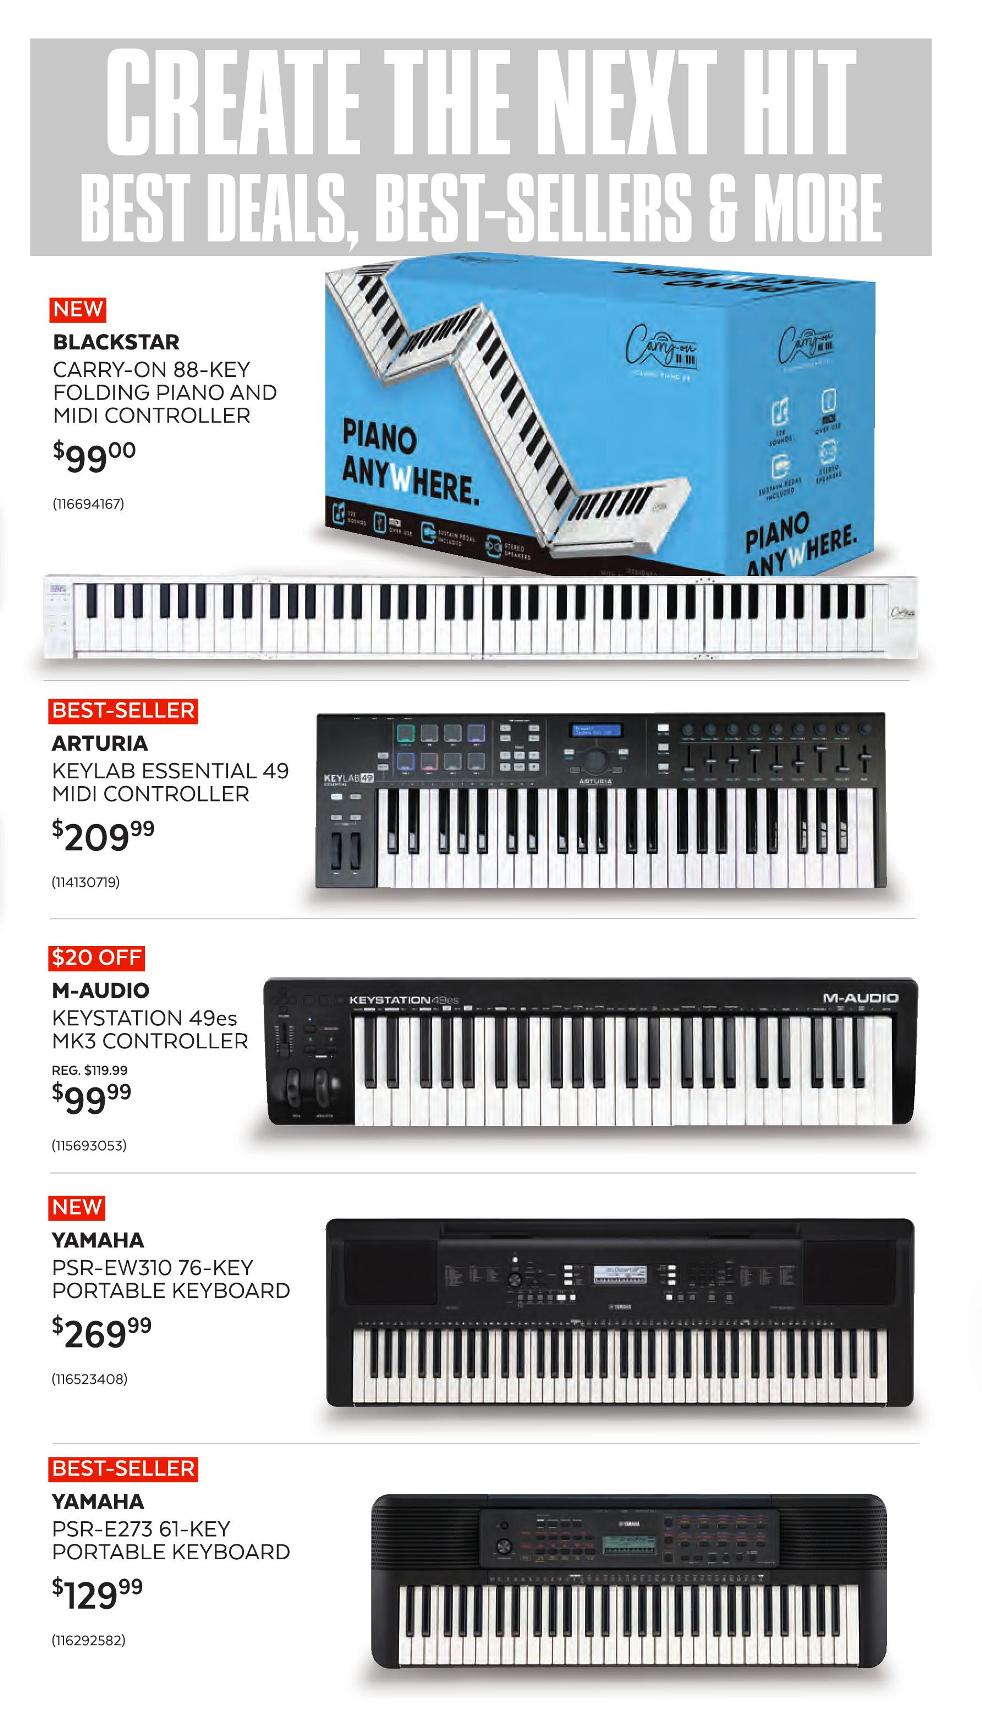 Keyboards cont.